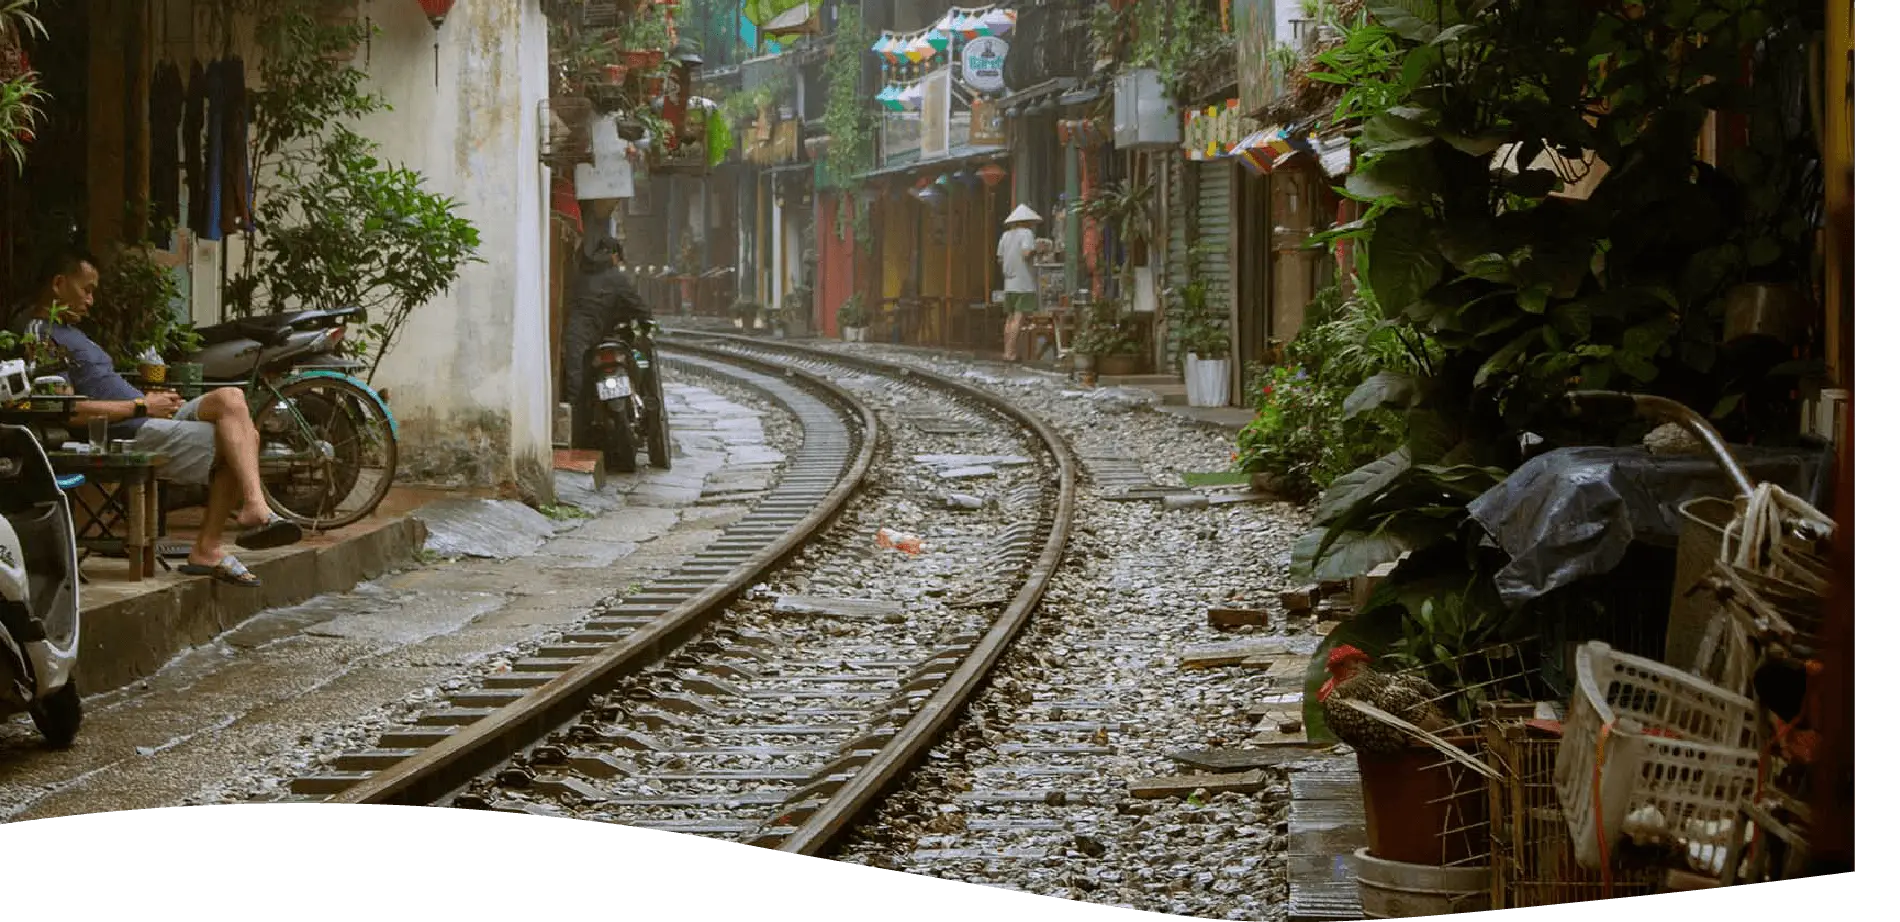 hanoi train street, on the left there is a man enjoying his coffee, while on the background we can see a a lot of plants hanging from the baclony of houses, which are right nect to the railtrack